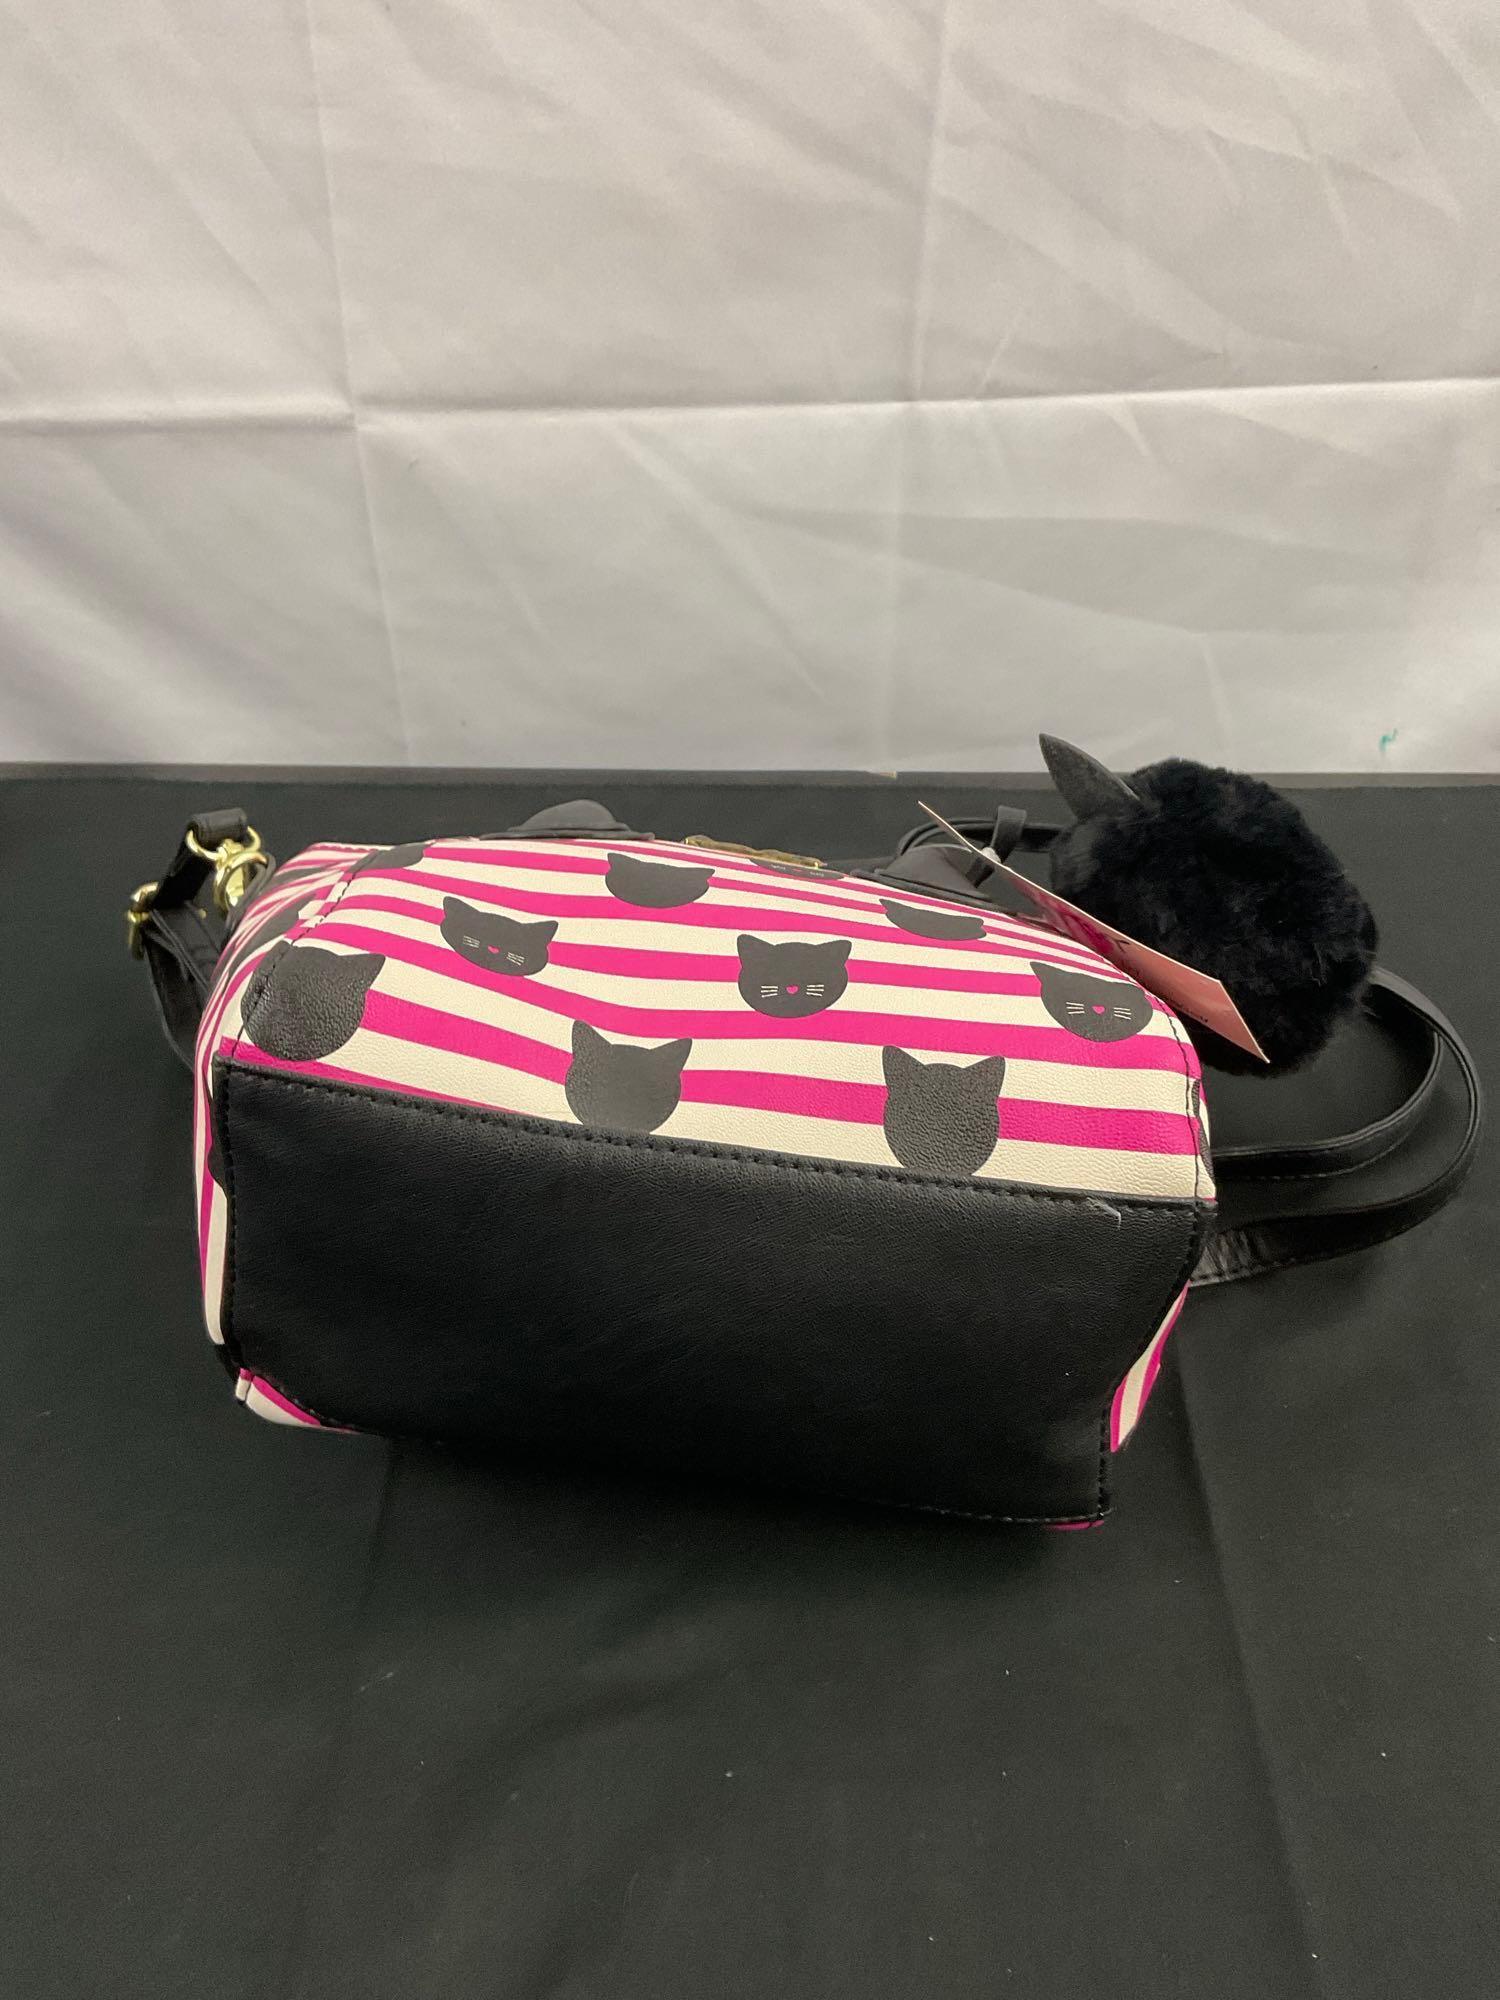 2 pcs Betsey Johnson Ladies Accessories. Luv Betsey Striped Purse & Enamel Cat Necklace. Like New.